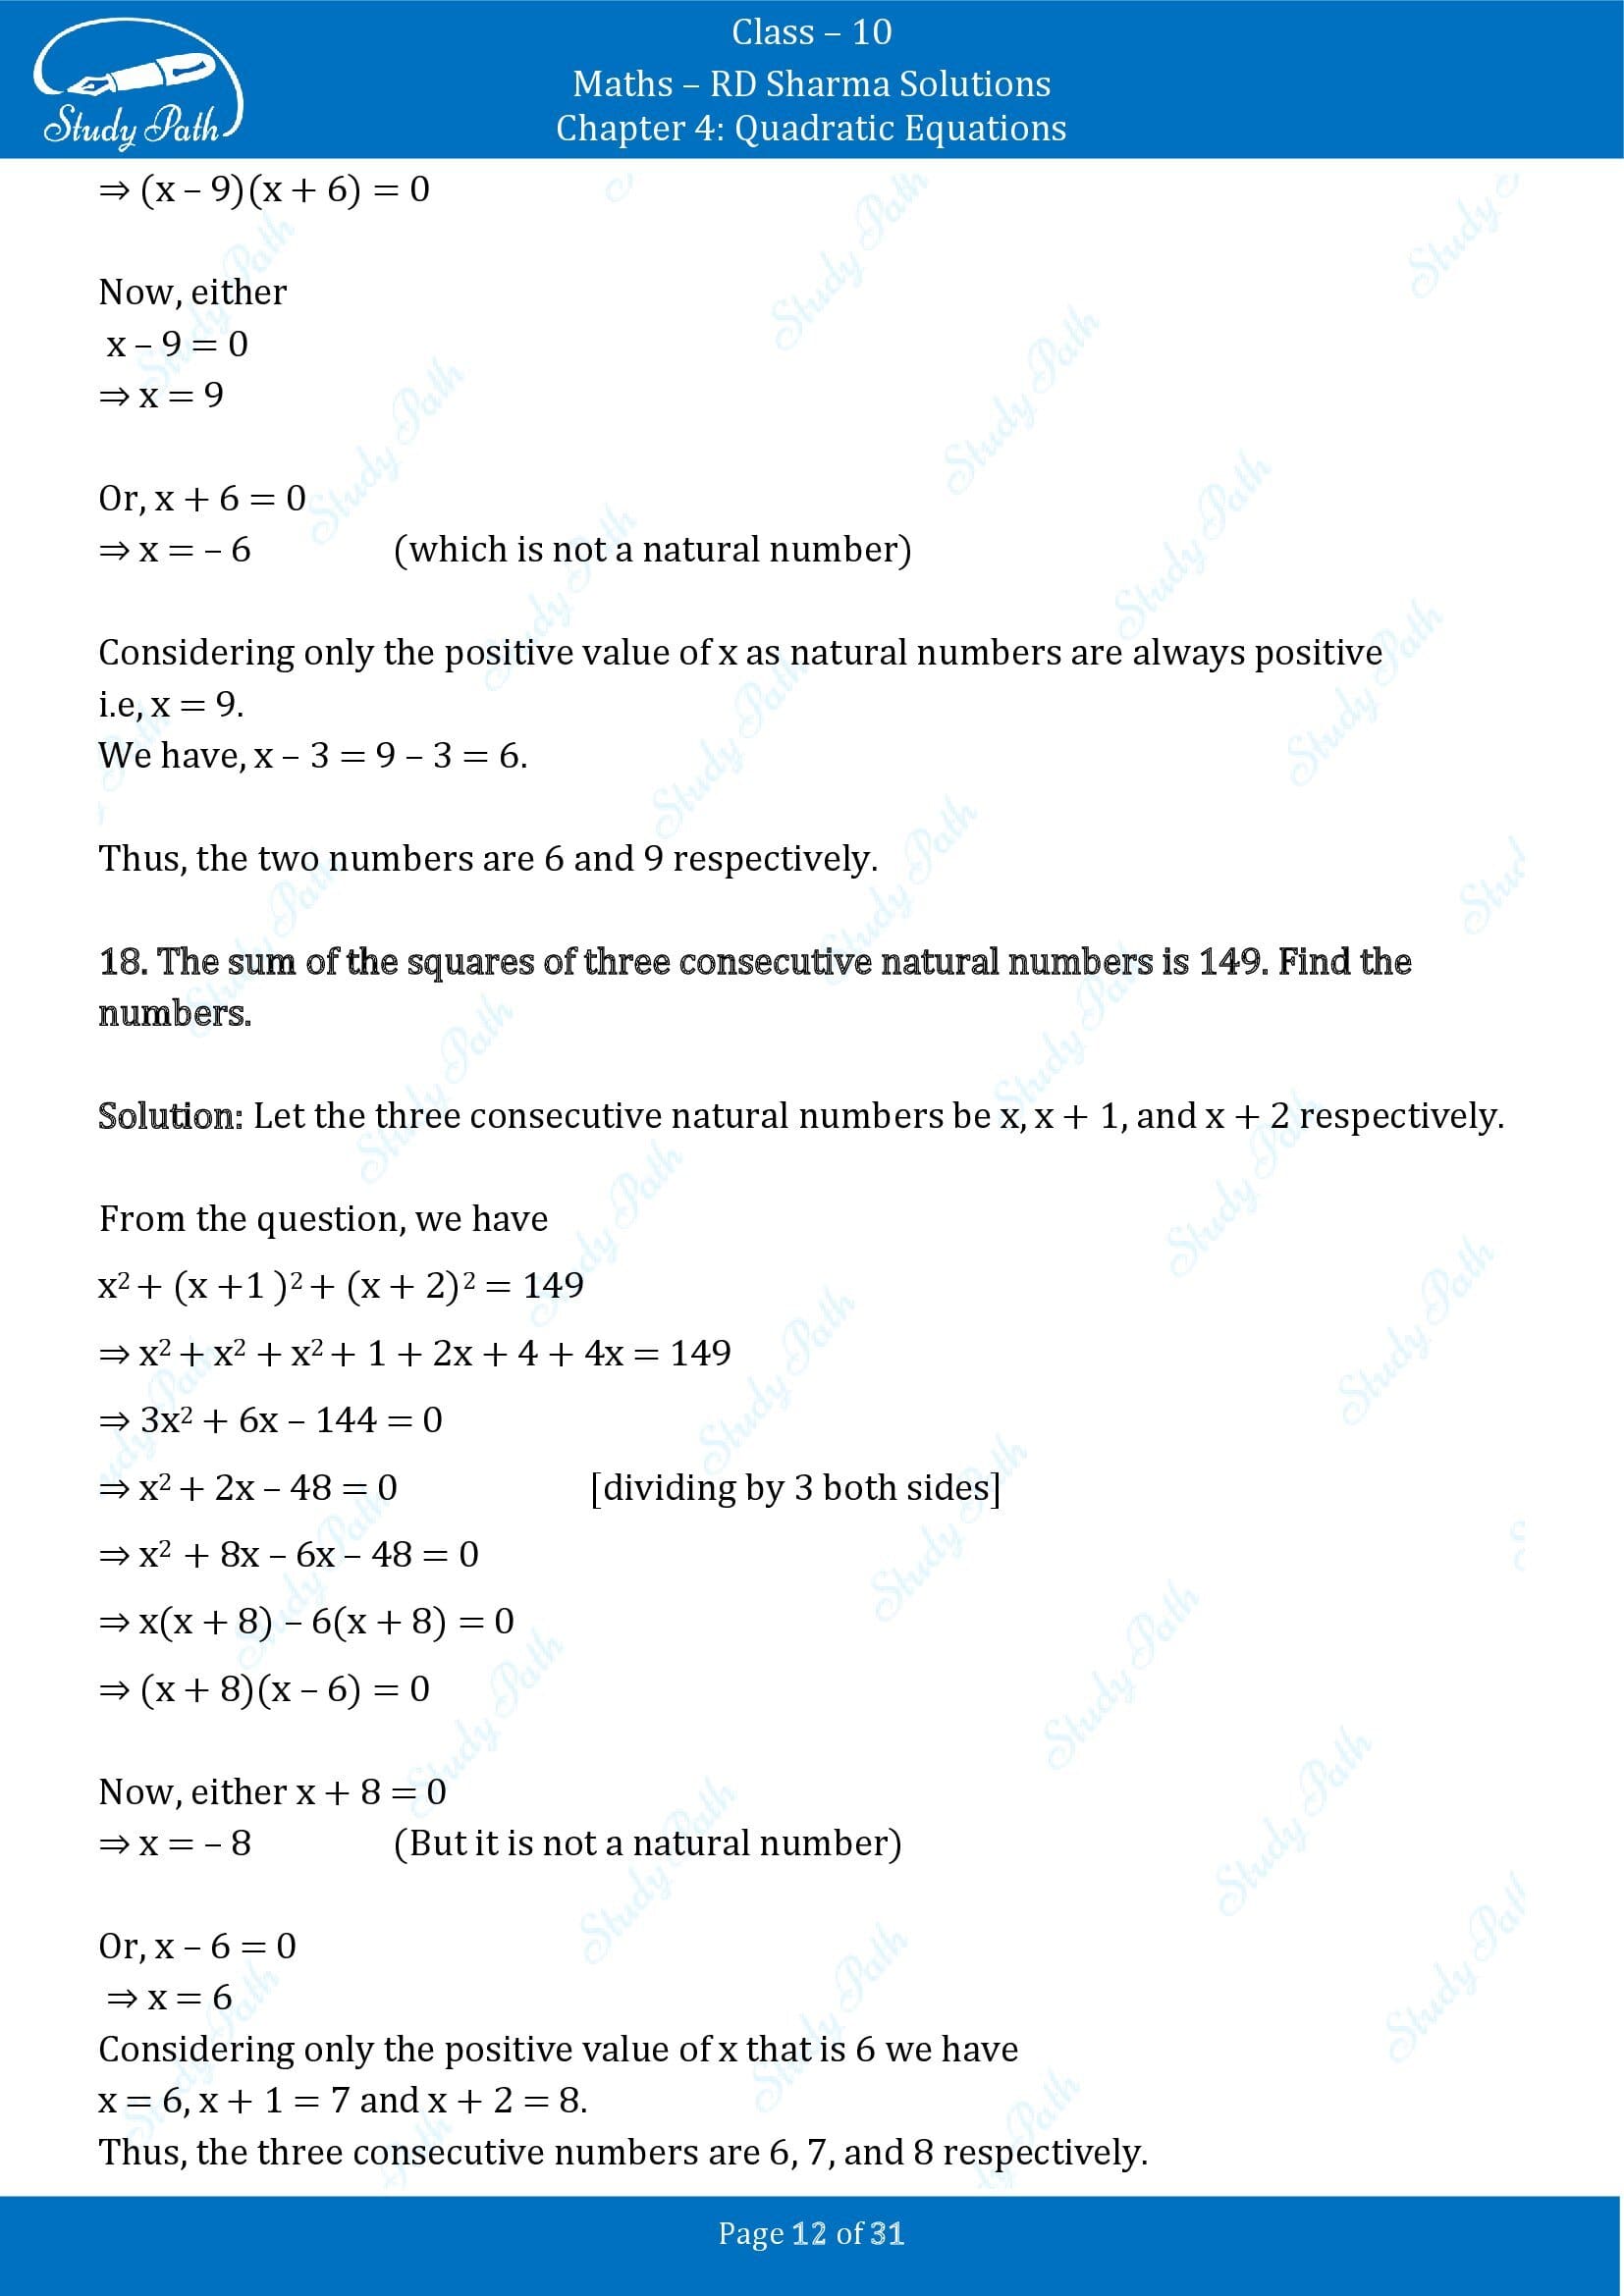 RD Sharma Solutions Class 10 Chapter 4 Quadratic Equations Exercise 4.7 00012